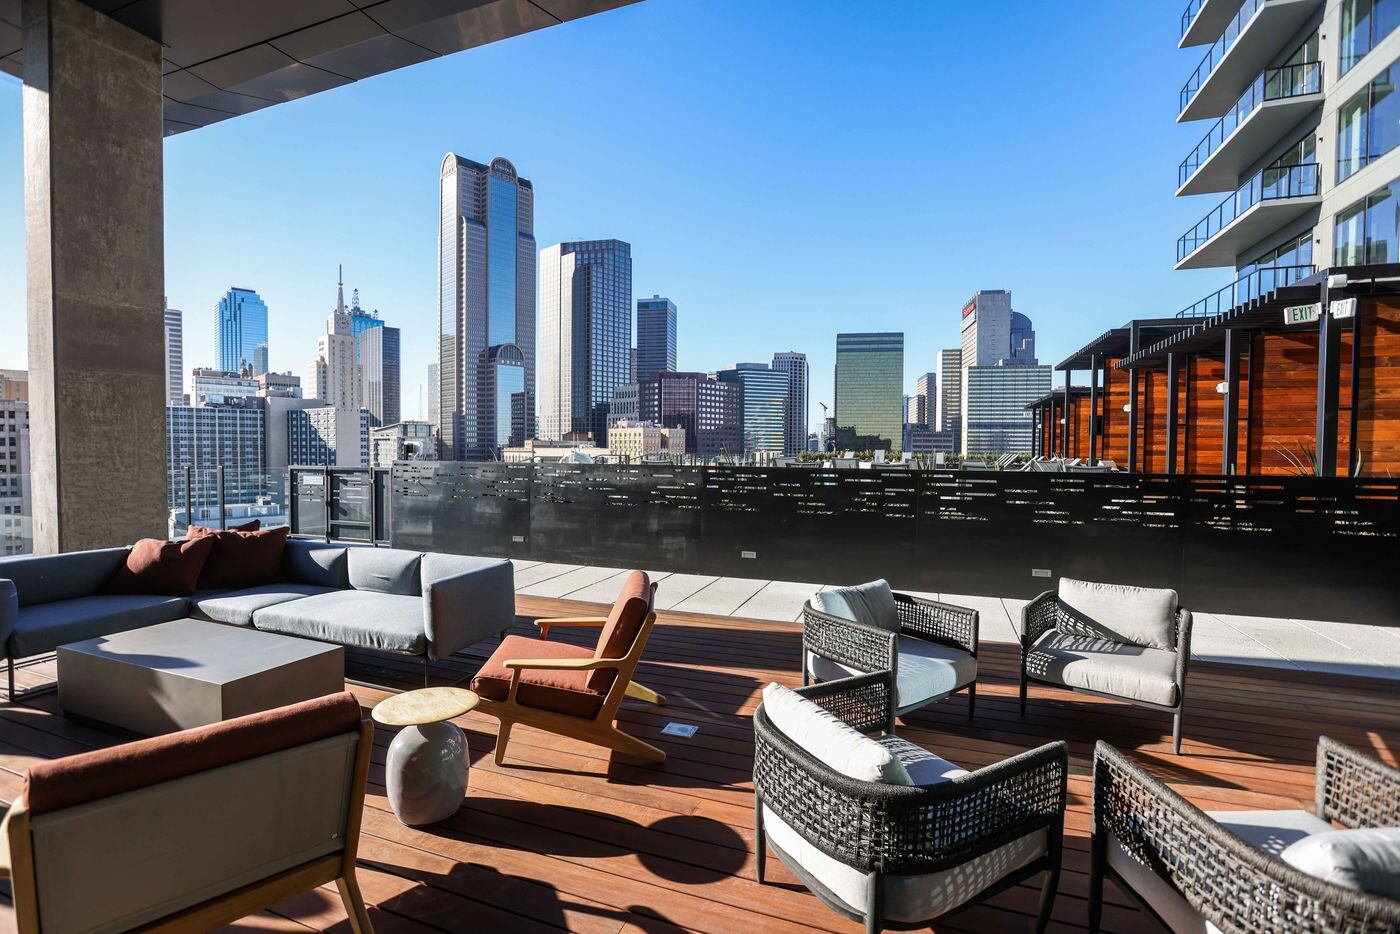 Outdoor lounge area on the eighth floor of  the new East Quarter Residences tower in...